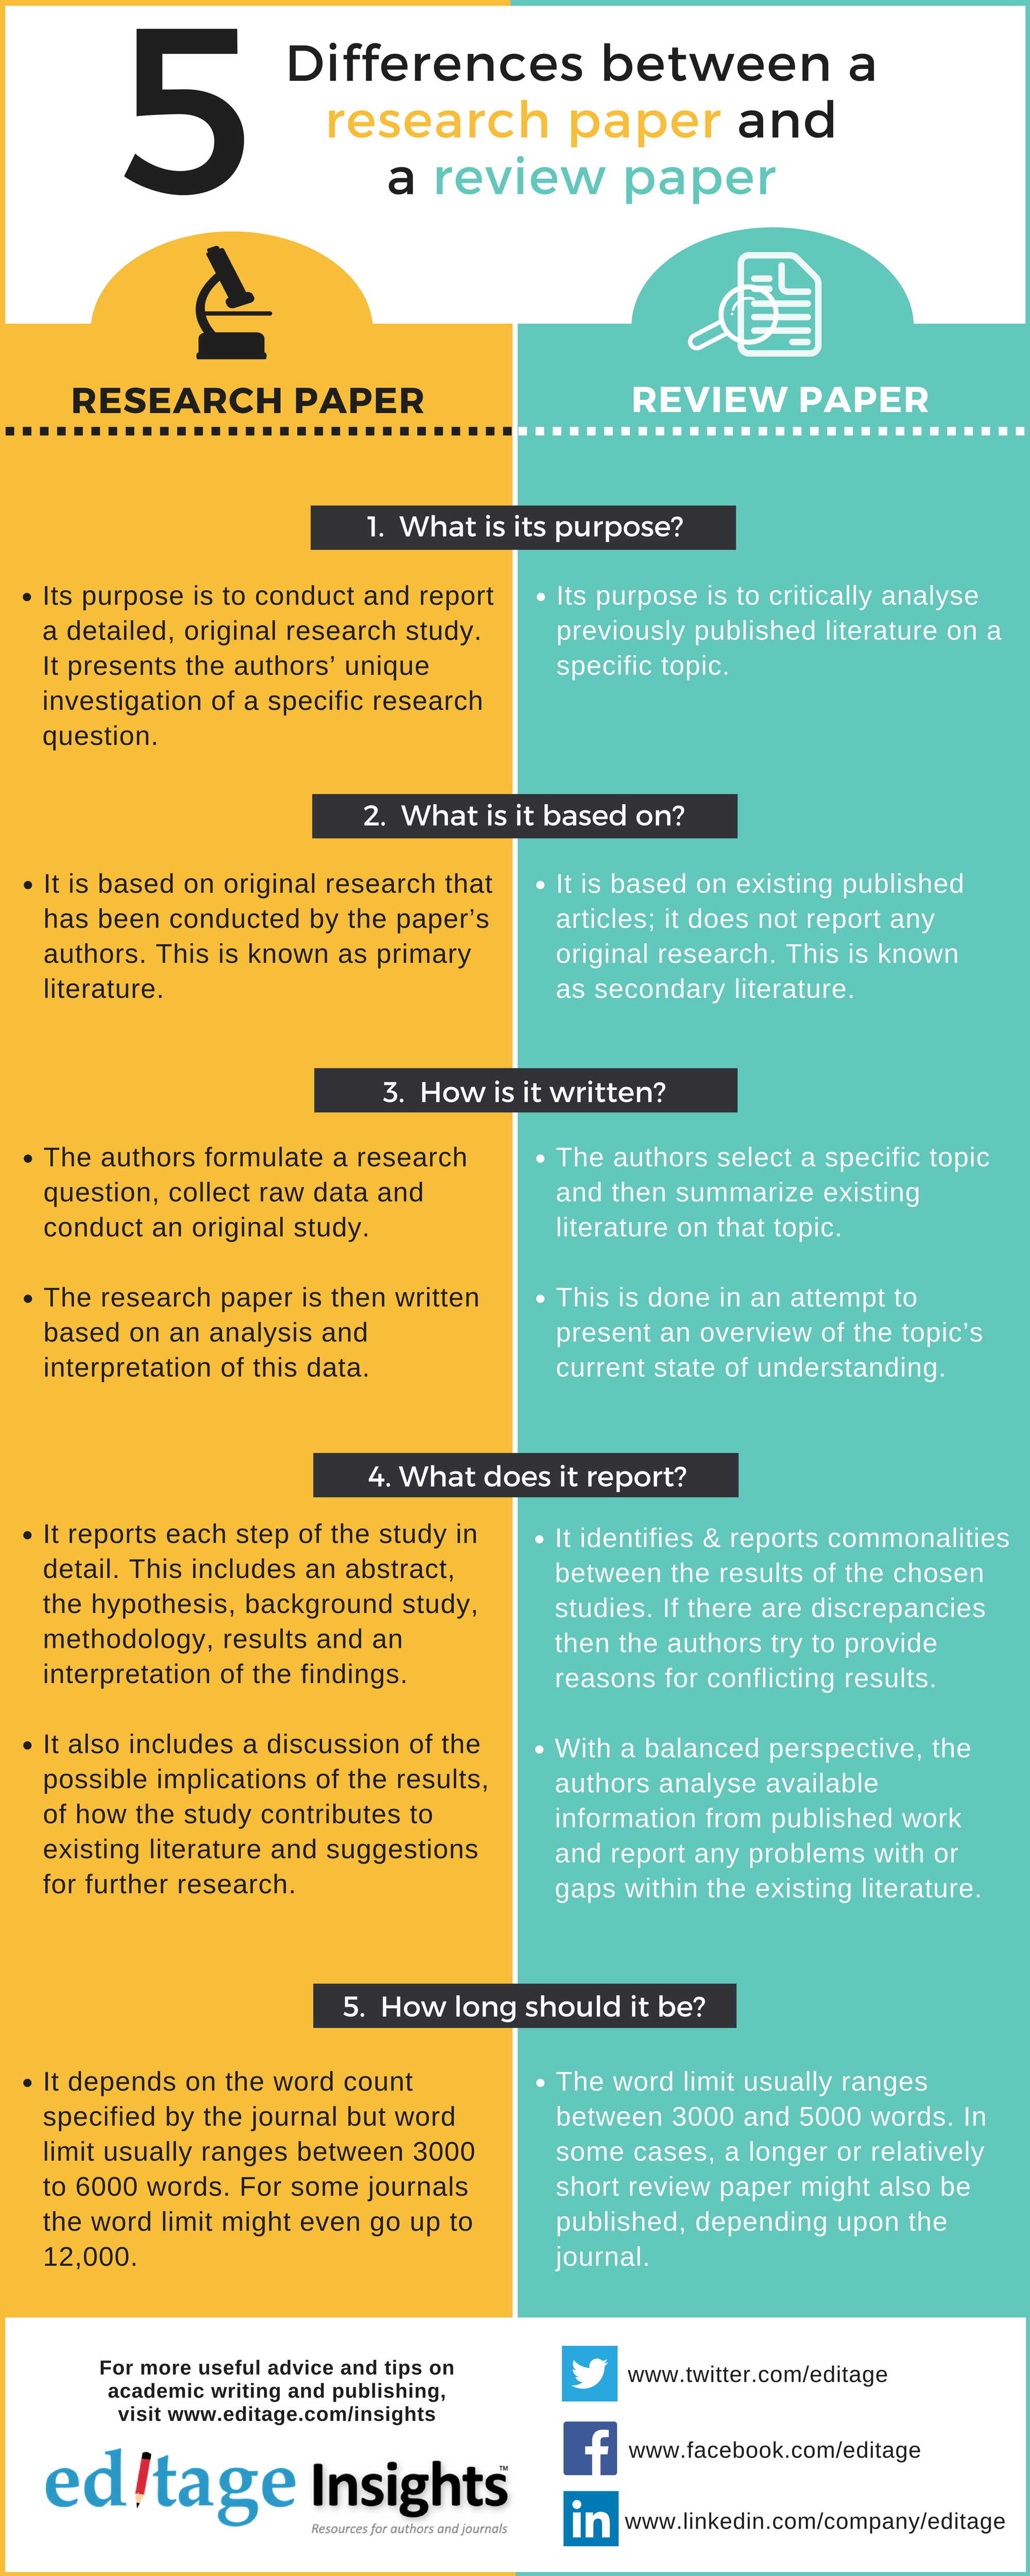 5 Differences between a research paper and a review paper